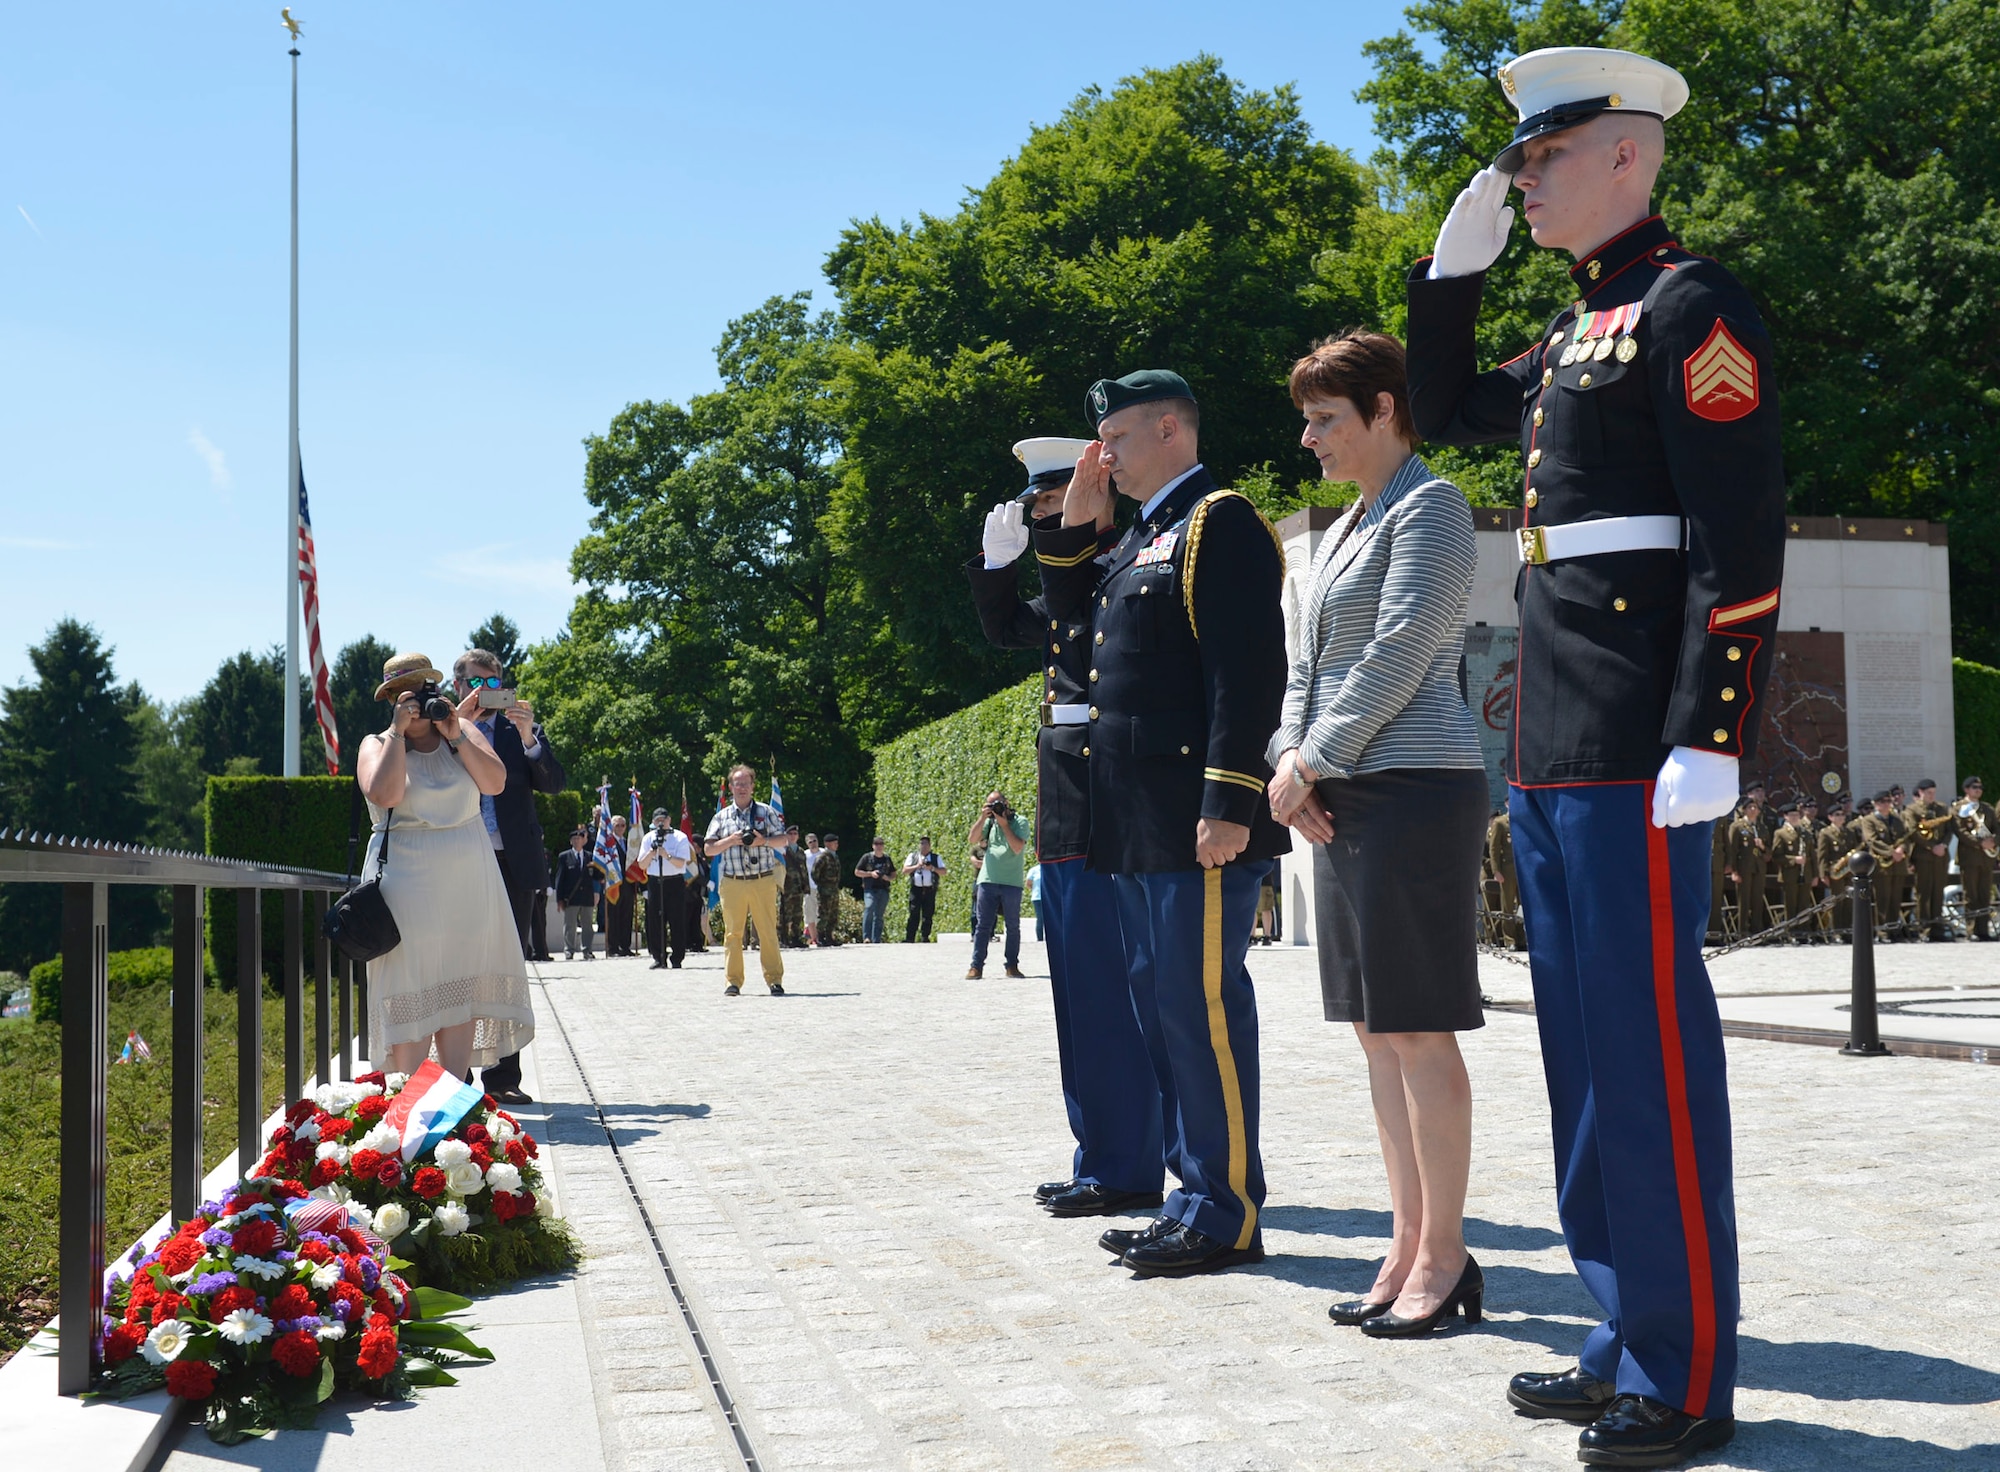 Service members and government officials dedicate a wreath during the Memorial Day Ceremony at the Luxembourg American Military Cemetary in Hamm, Luxembourg, May 27, 2017. The ceremony brought together military representatives and hundreds of supporters to recognize the sacrifices made by American service members in support of freedom abroad.